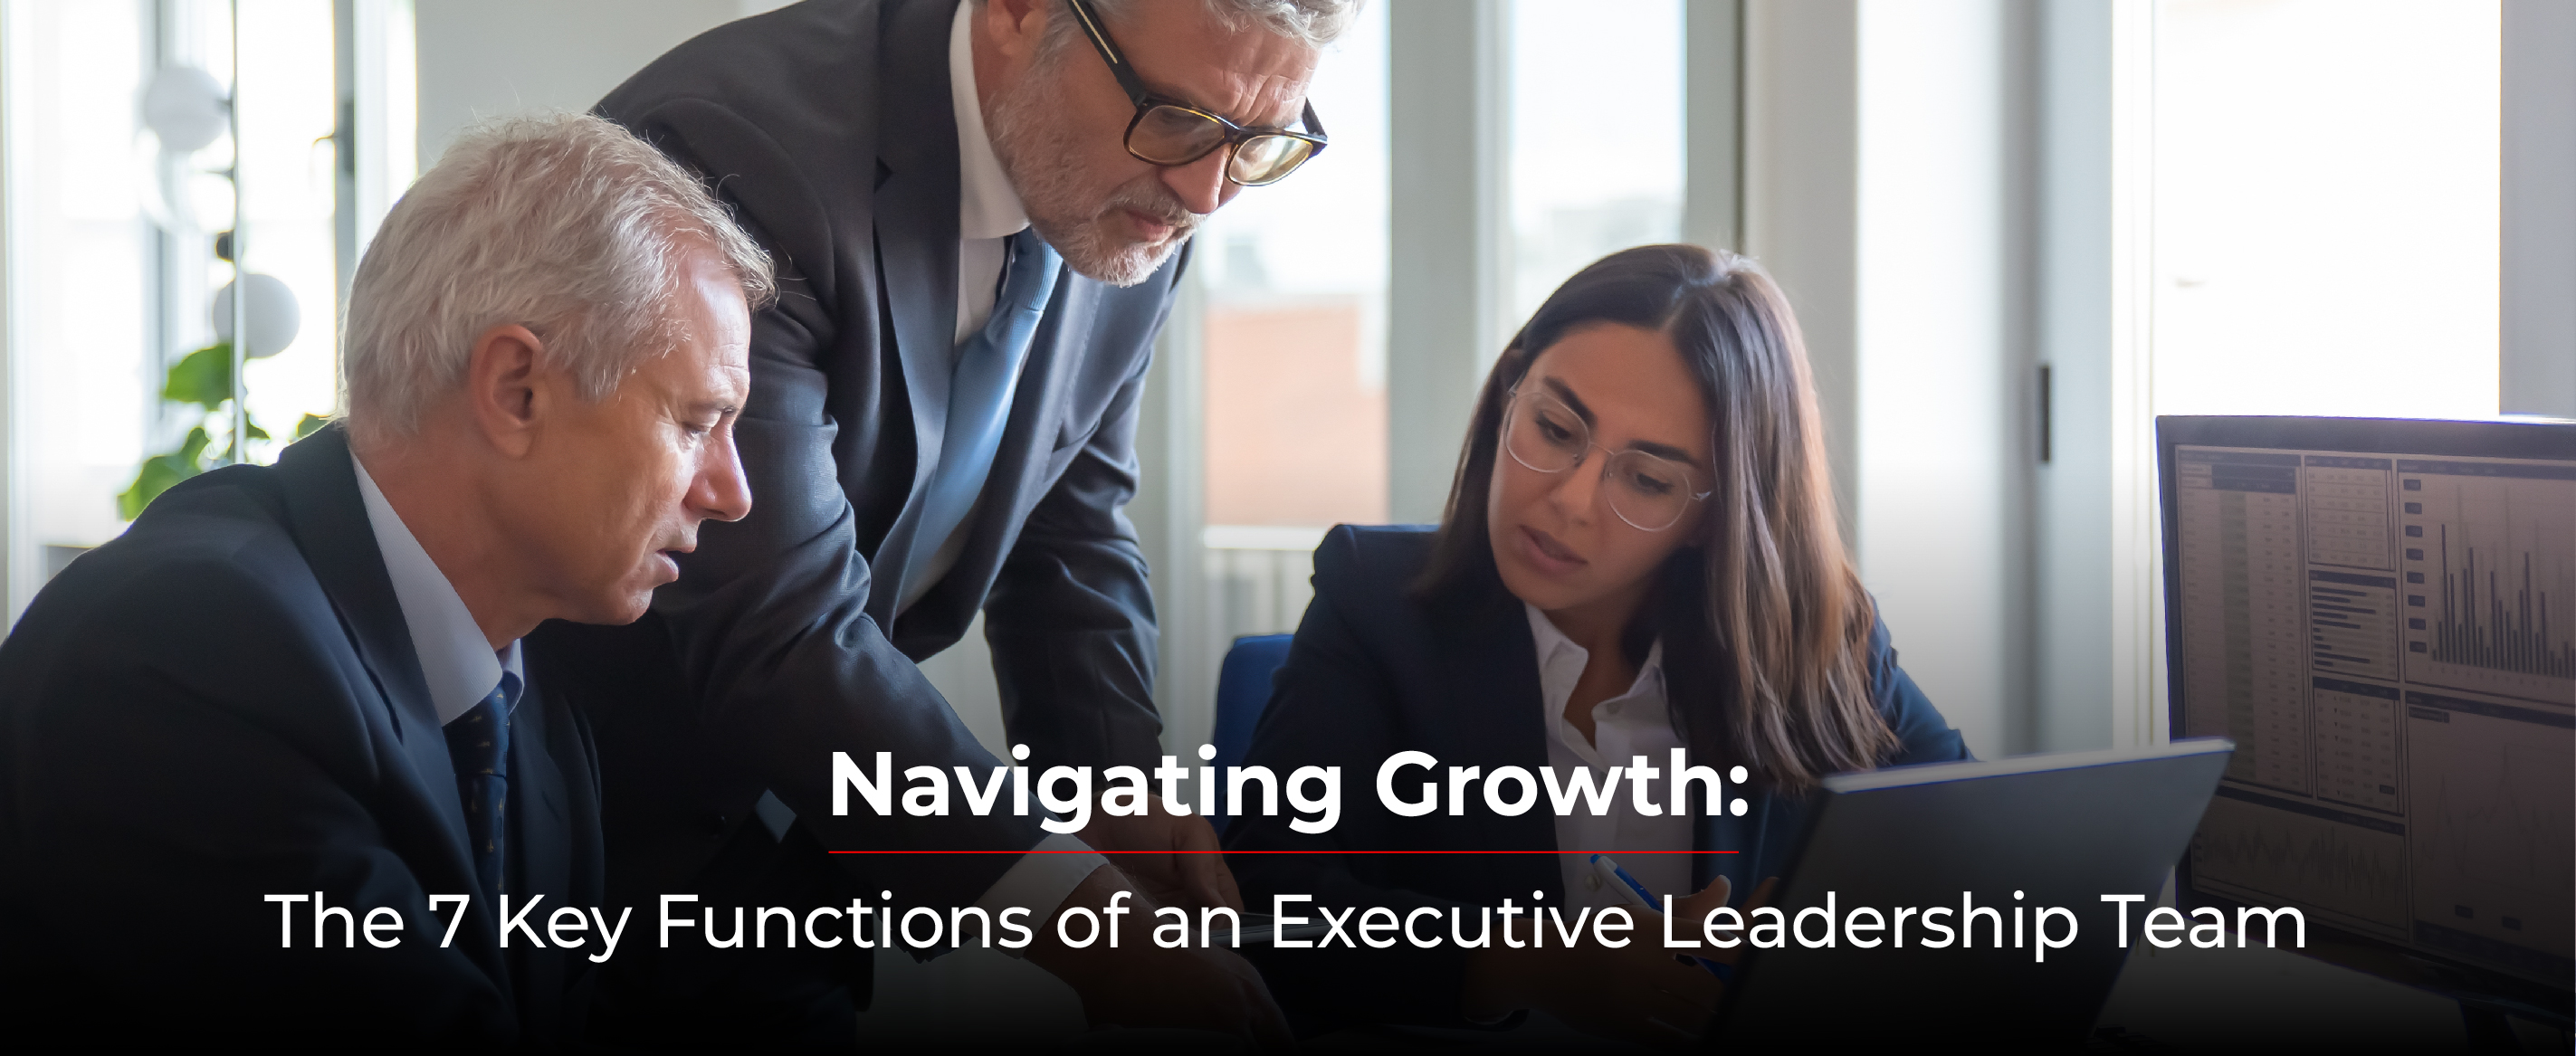 Navigating Growth: The 7 Key Functions of an Executive Leadership Team